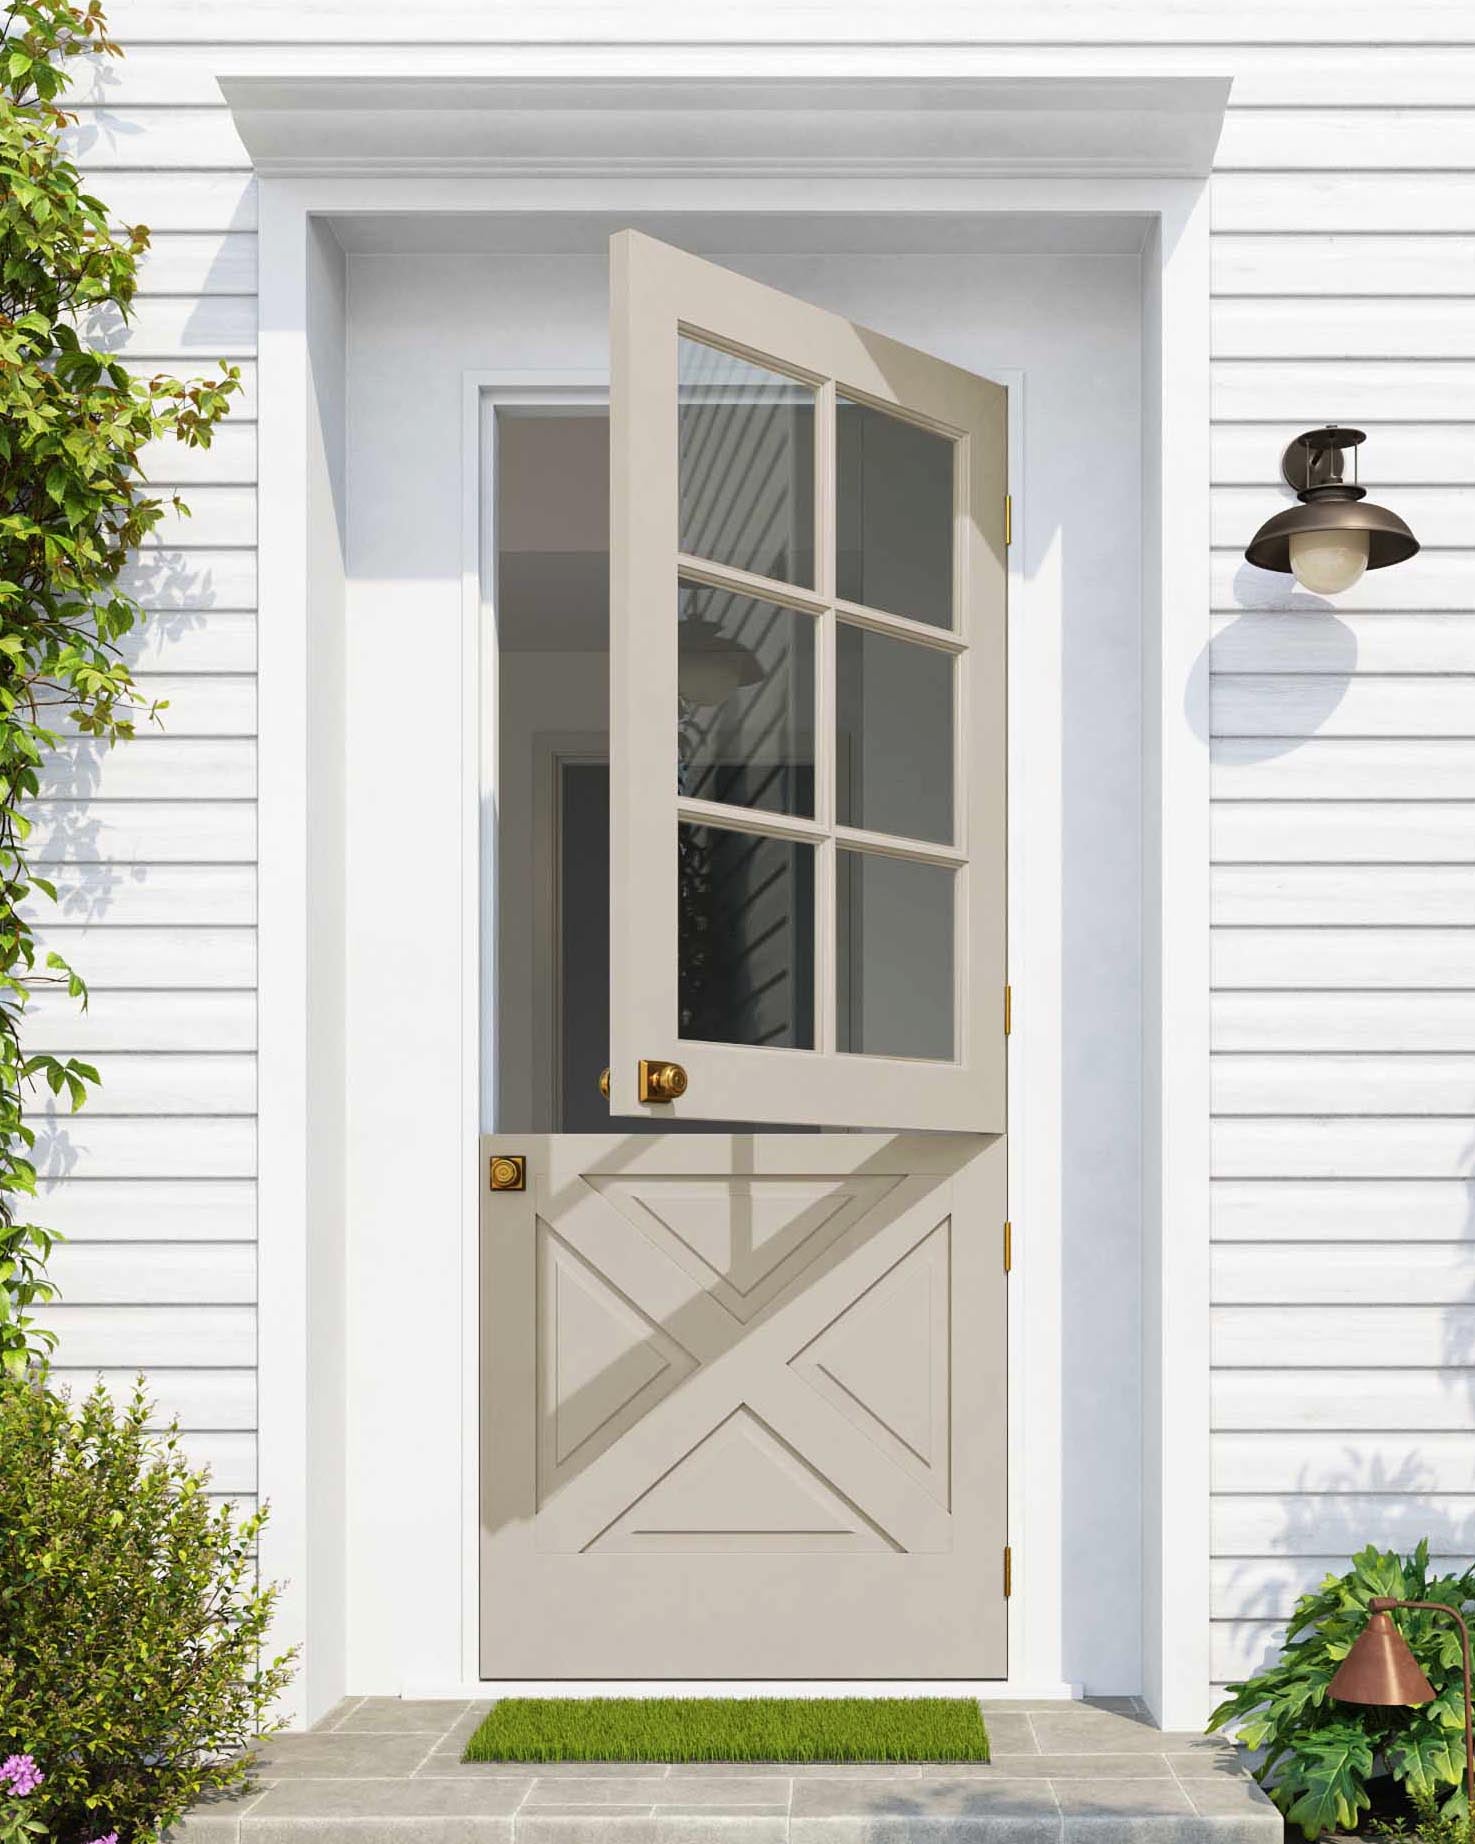 Looking for neutral front door paint colors? Take a look at this front door painted in Clare’s Flaitron Exterior Paint, the perfect shade for minimalists.